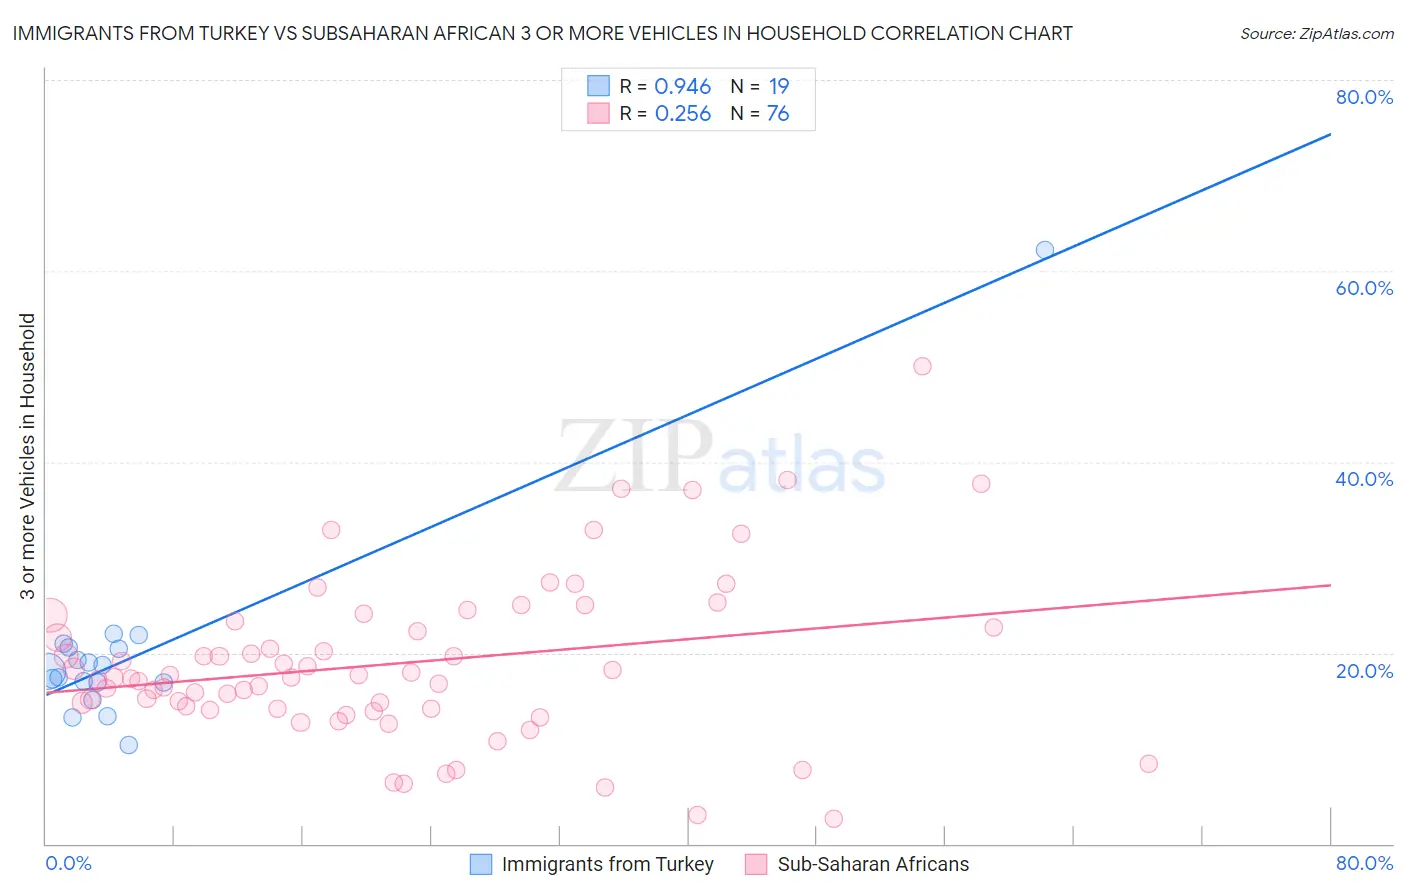 Immigrants from Turkey vs Subsaharan African 3 or more Vehicles in Household